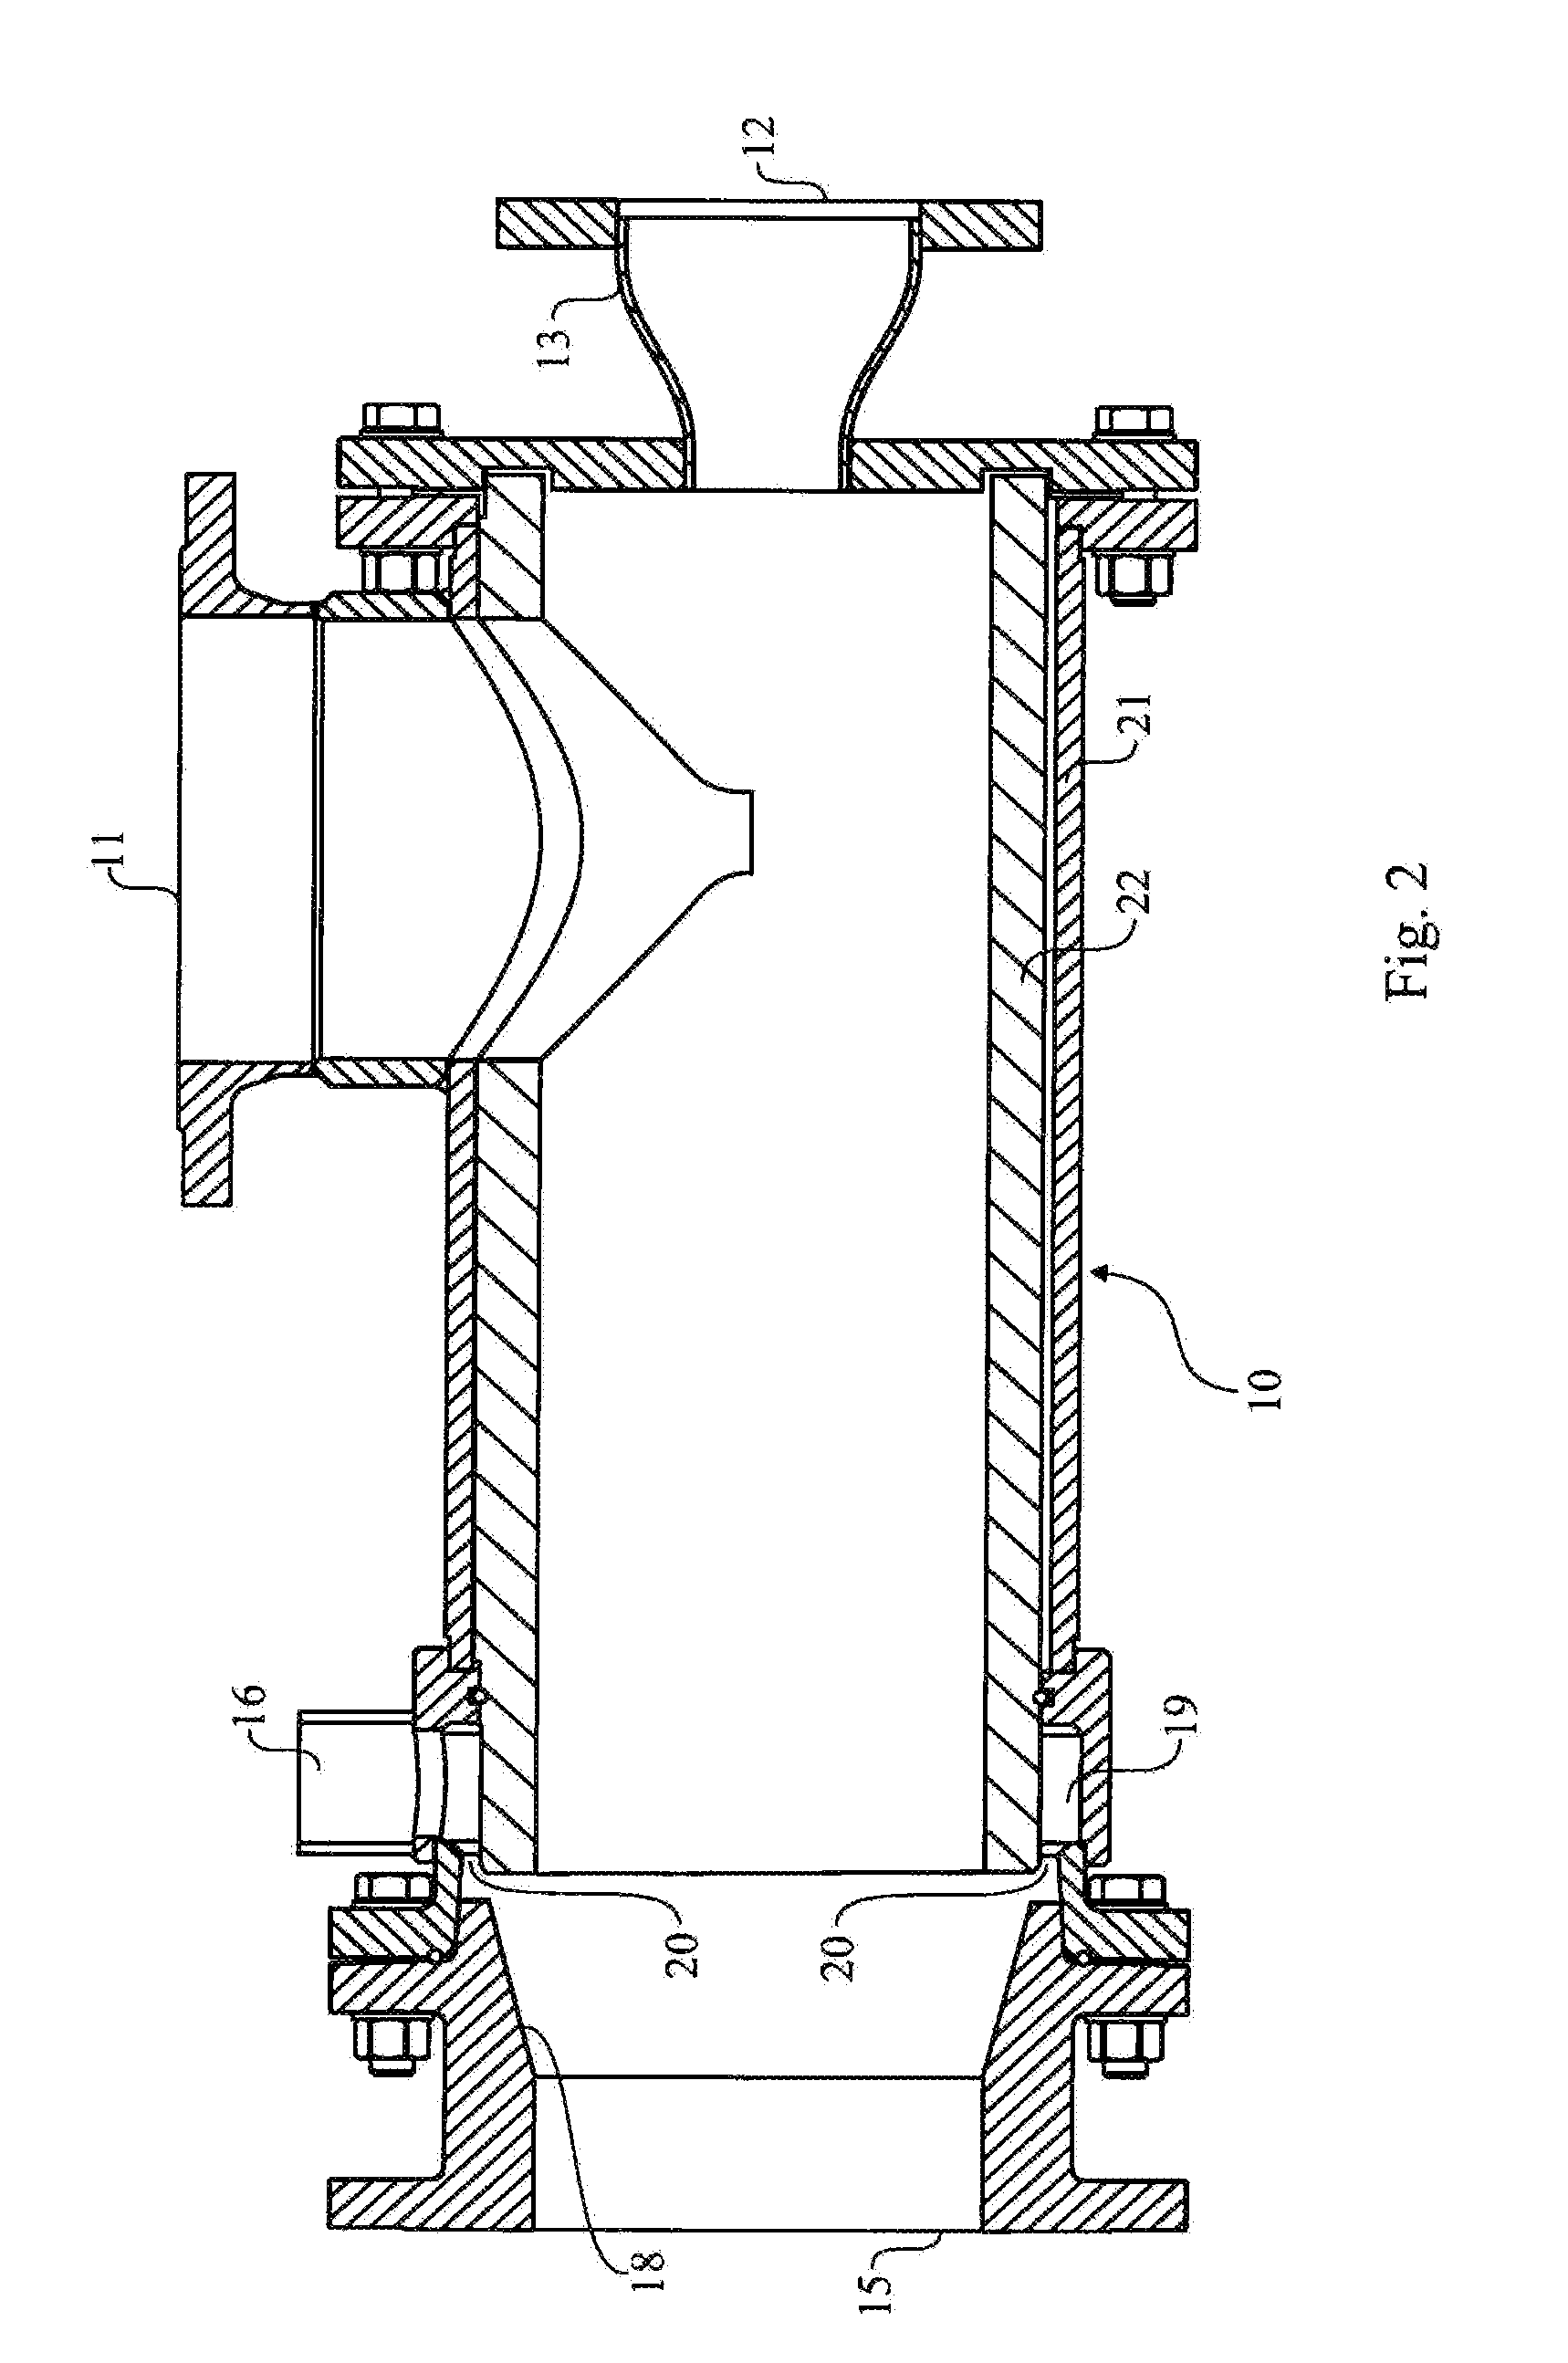 Method and device for output of granulate from the bottom of a tank that in addition to granulate holds liquid